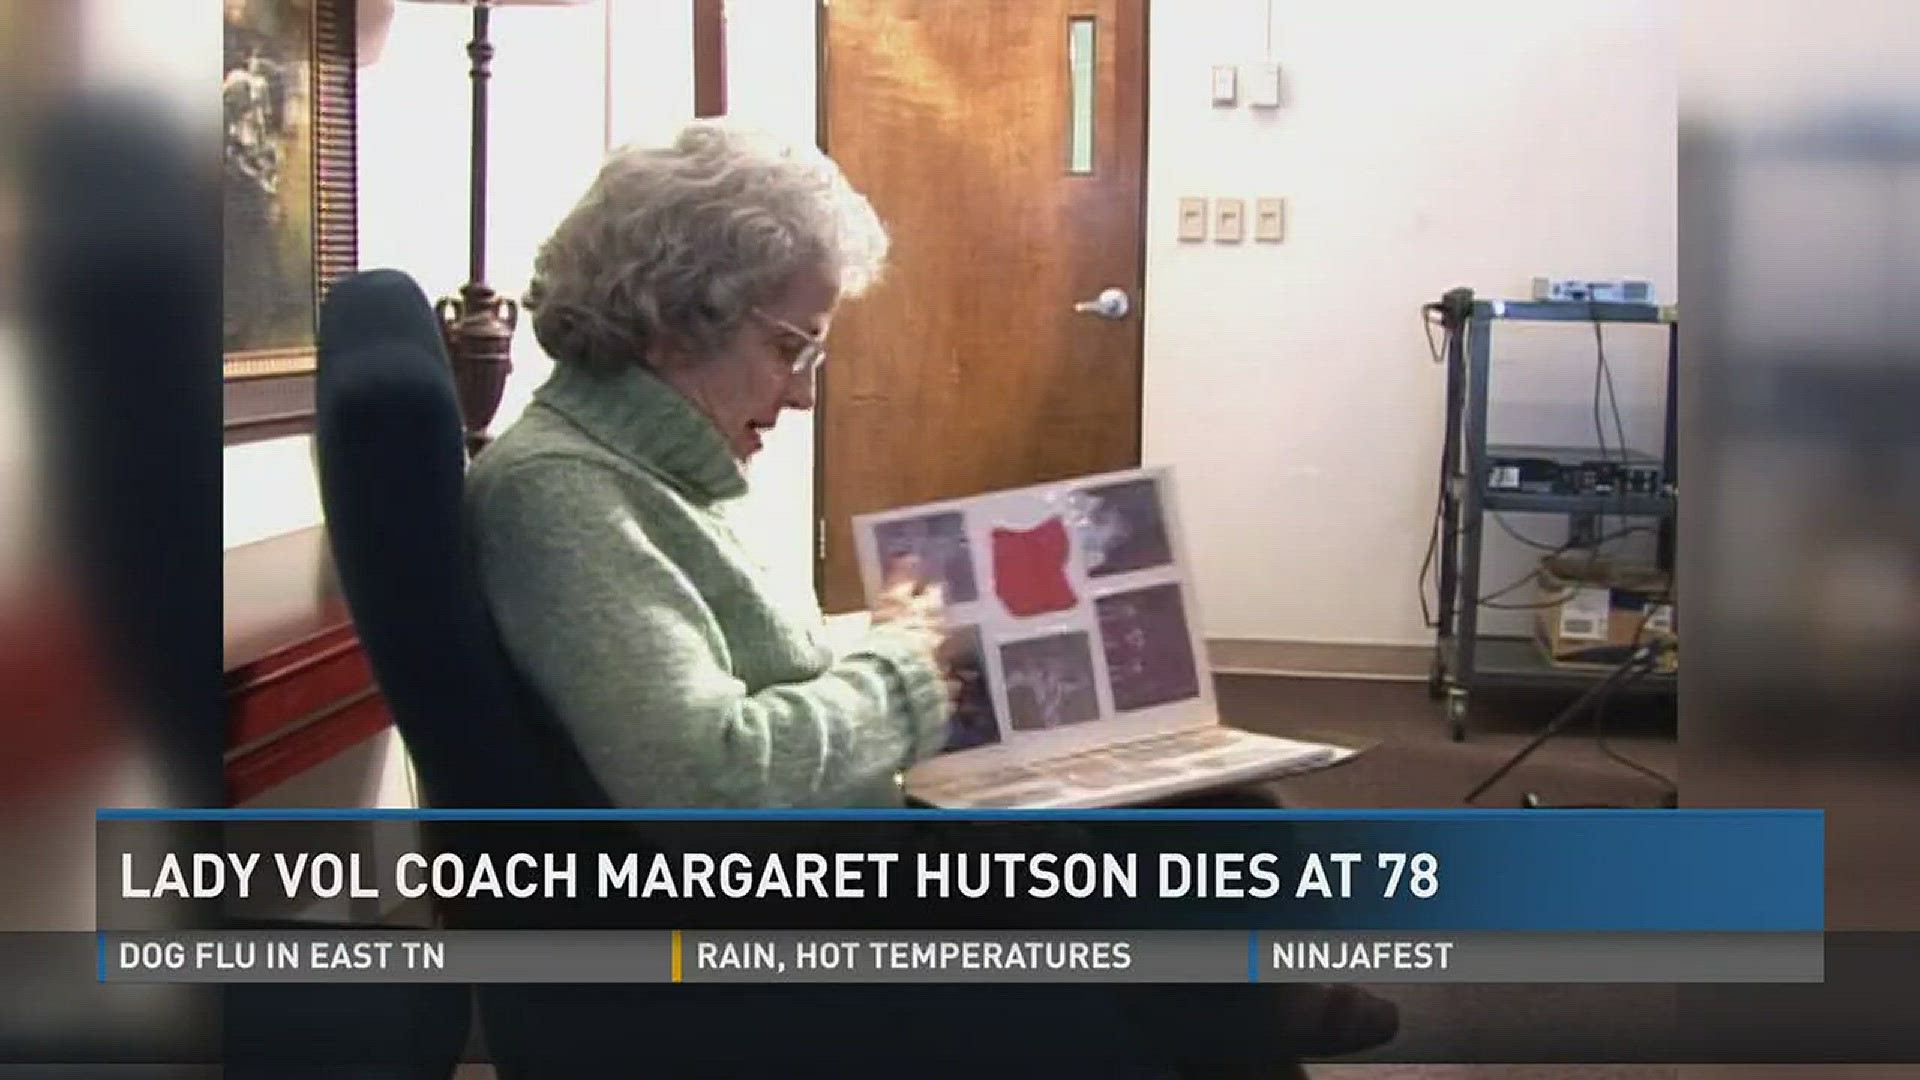 Margaret Hutson, the first coach of the Lady Vols basketball team, died on June 7, 2017 at the age of 78.